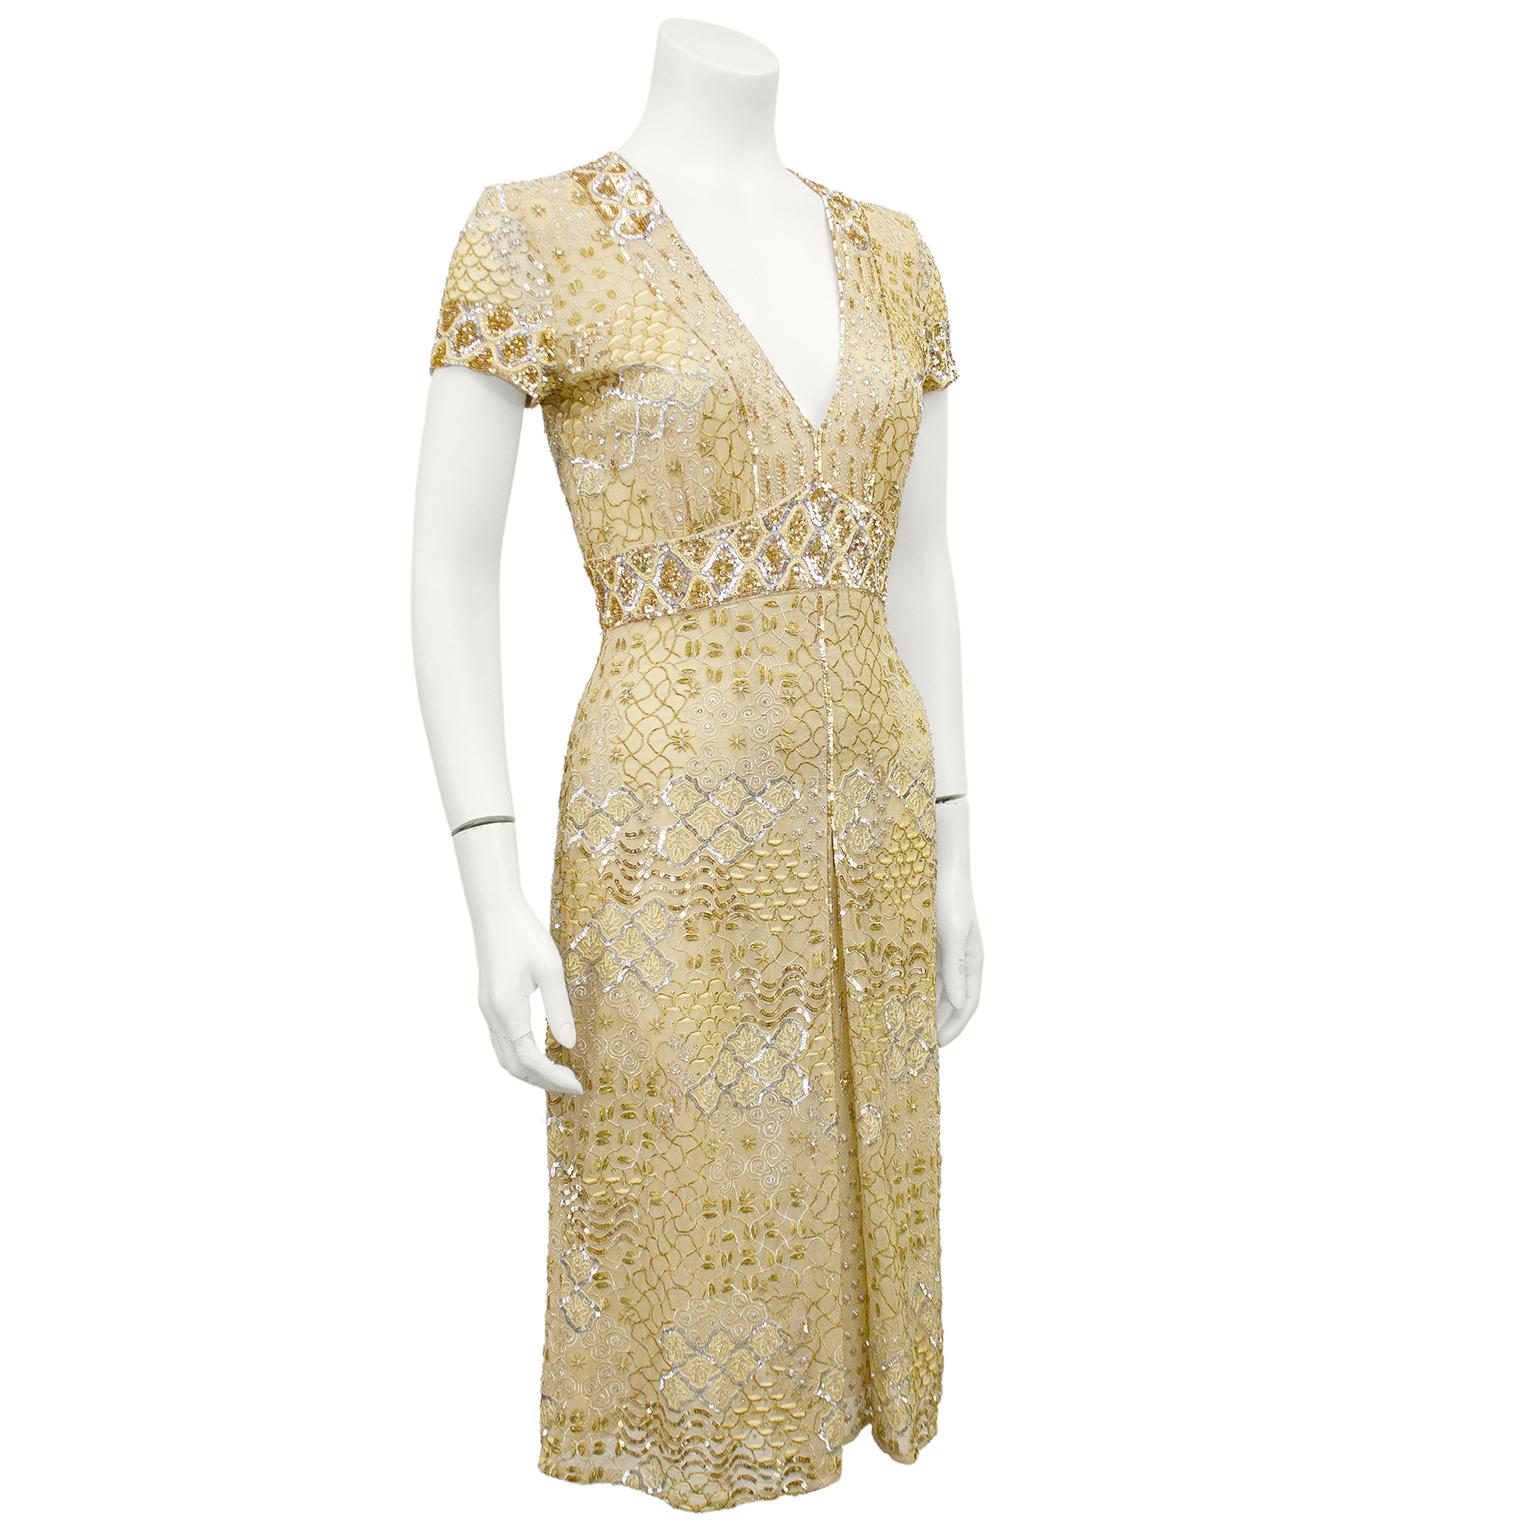 Glamorous 2000s Naeem Khan cocktail dress. Gold with all over gold and silver sequins, hand beading and tambour stitching. Short sleeve with a v neck line. Skirt features an inverted pleat, adding shape and movement. A classic shape with beautiful